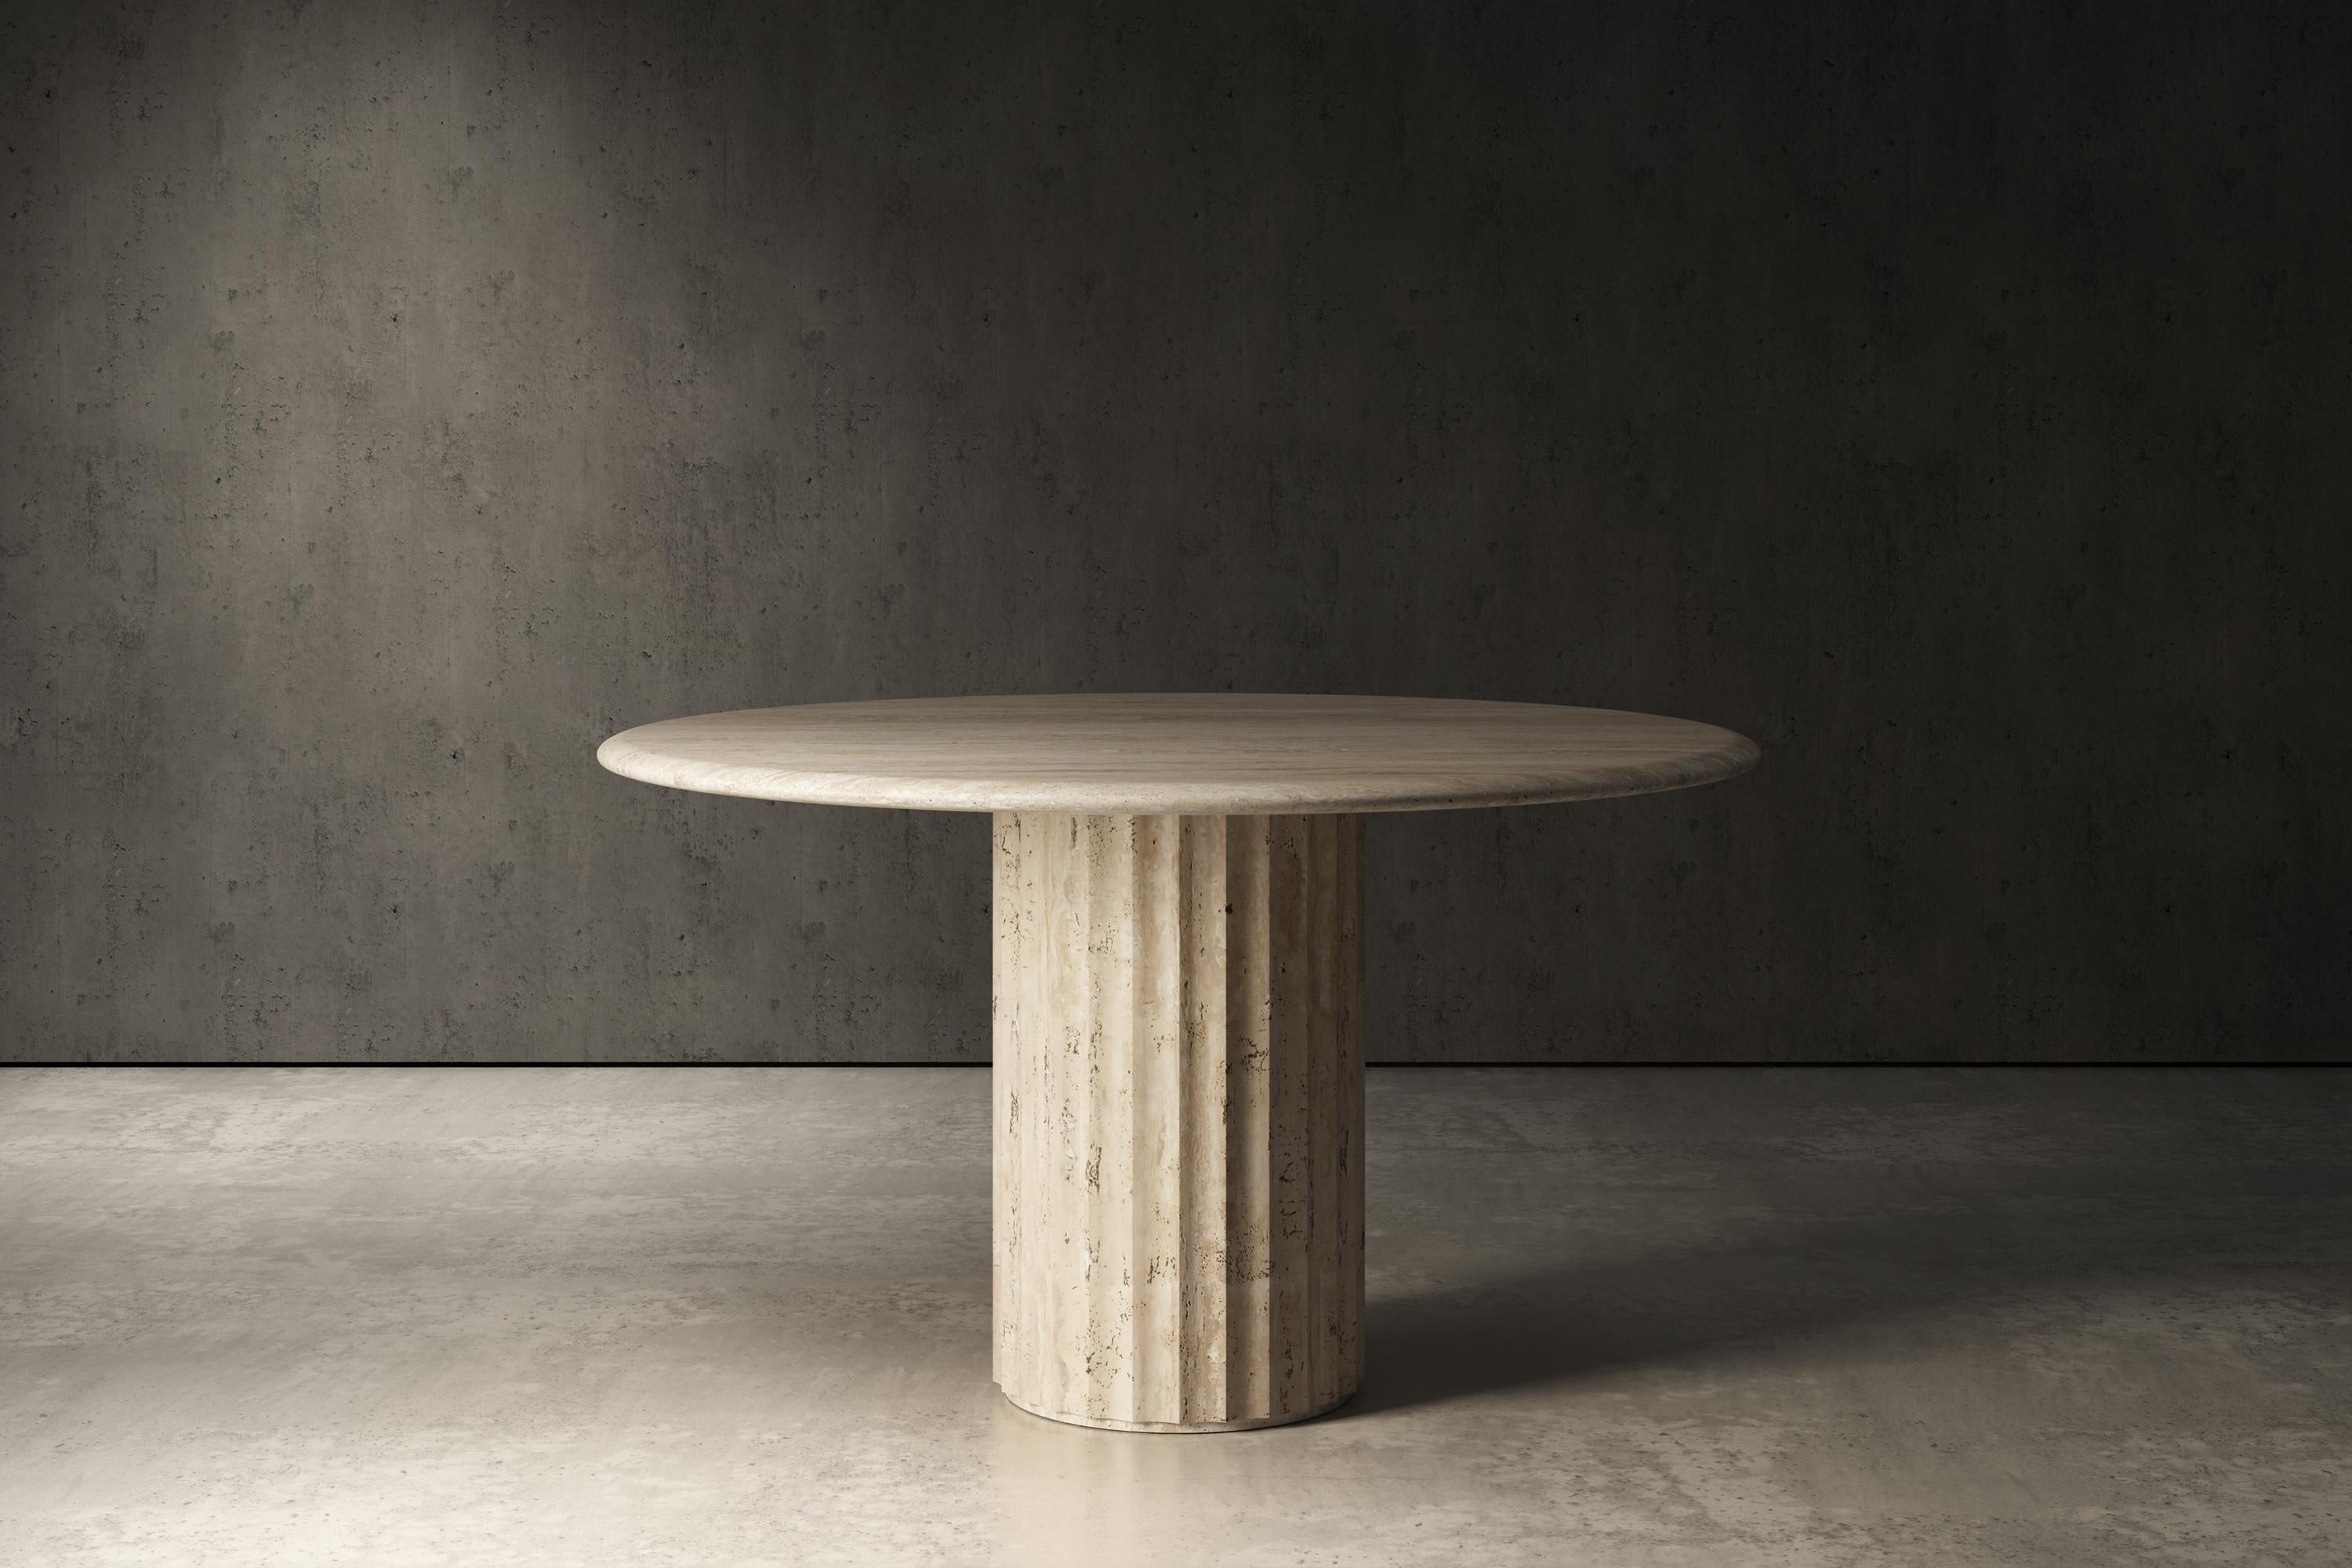 The Dorigo round table can be customizable in different sizes and stones.